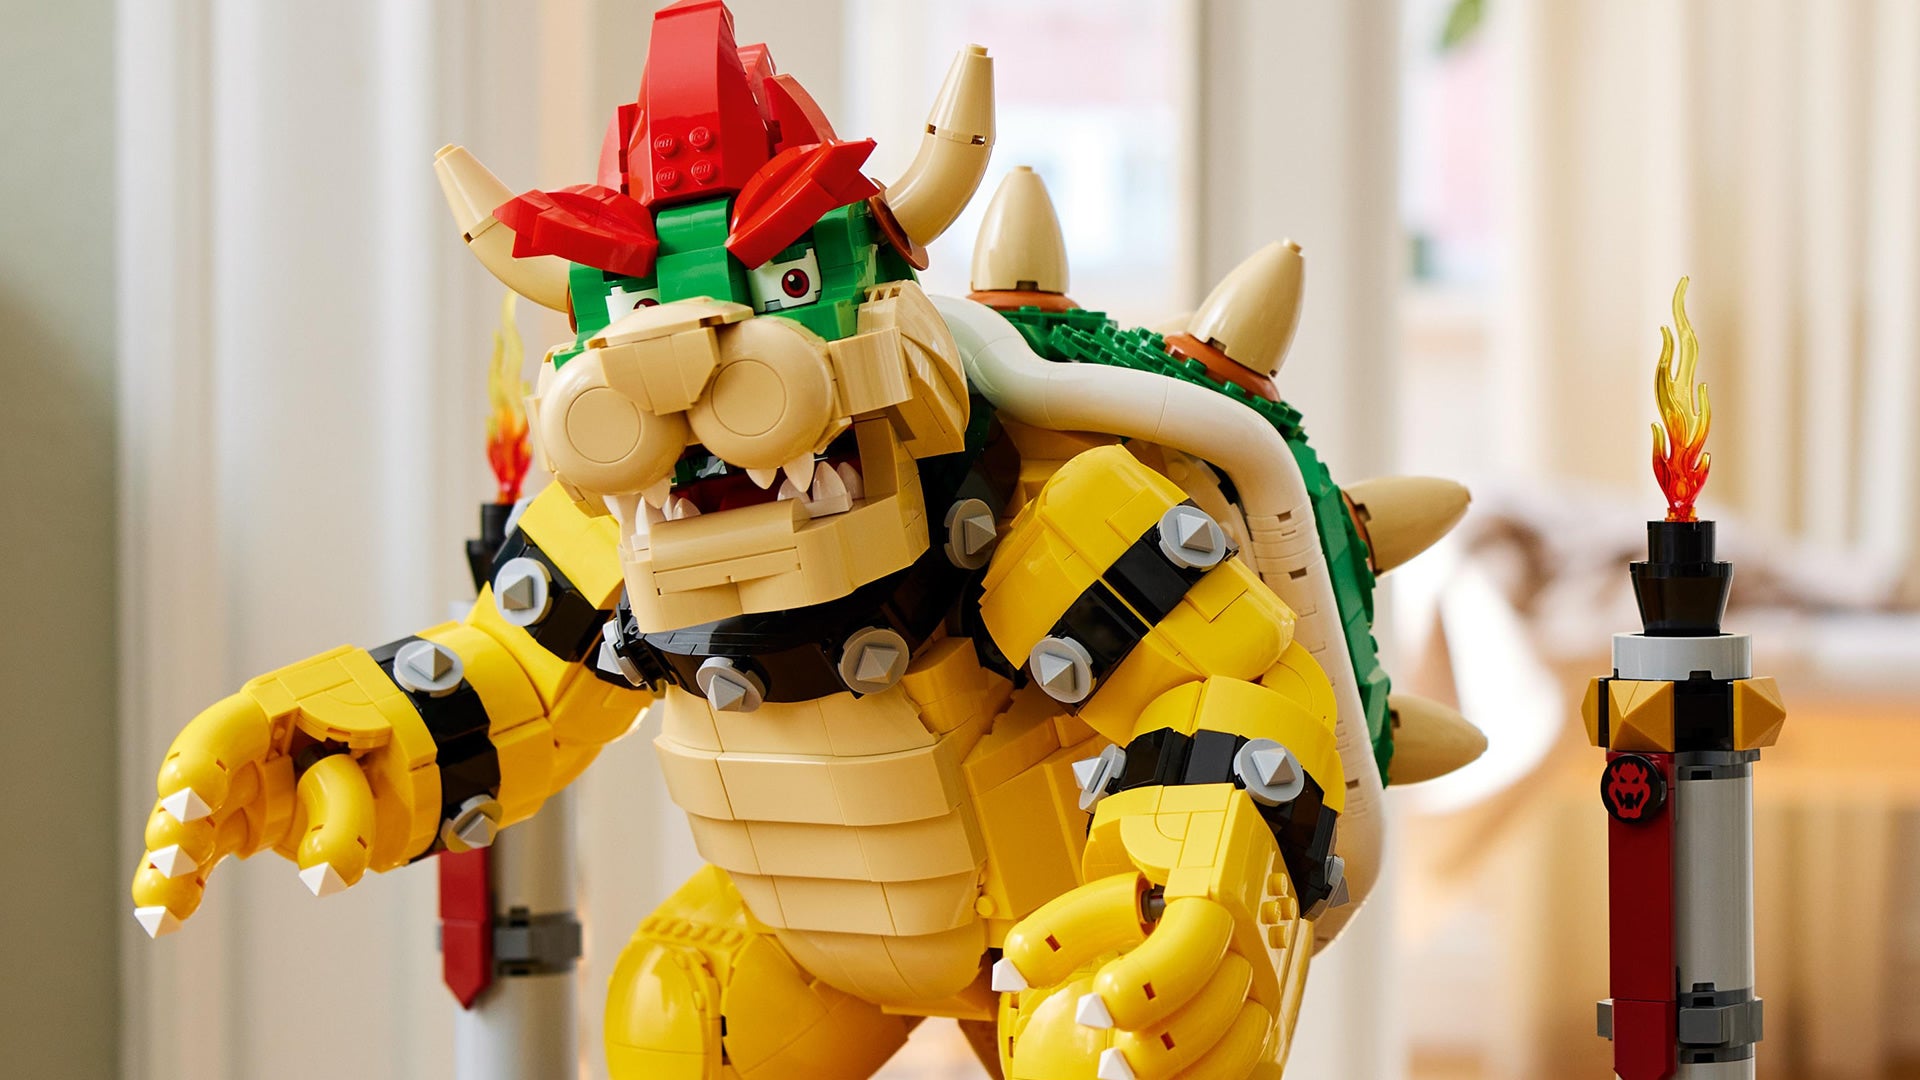 Image for Lego Super Mario's latest set is a gigantic figure of Bowser